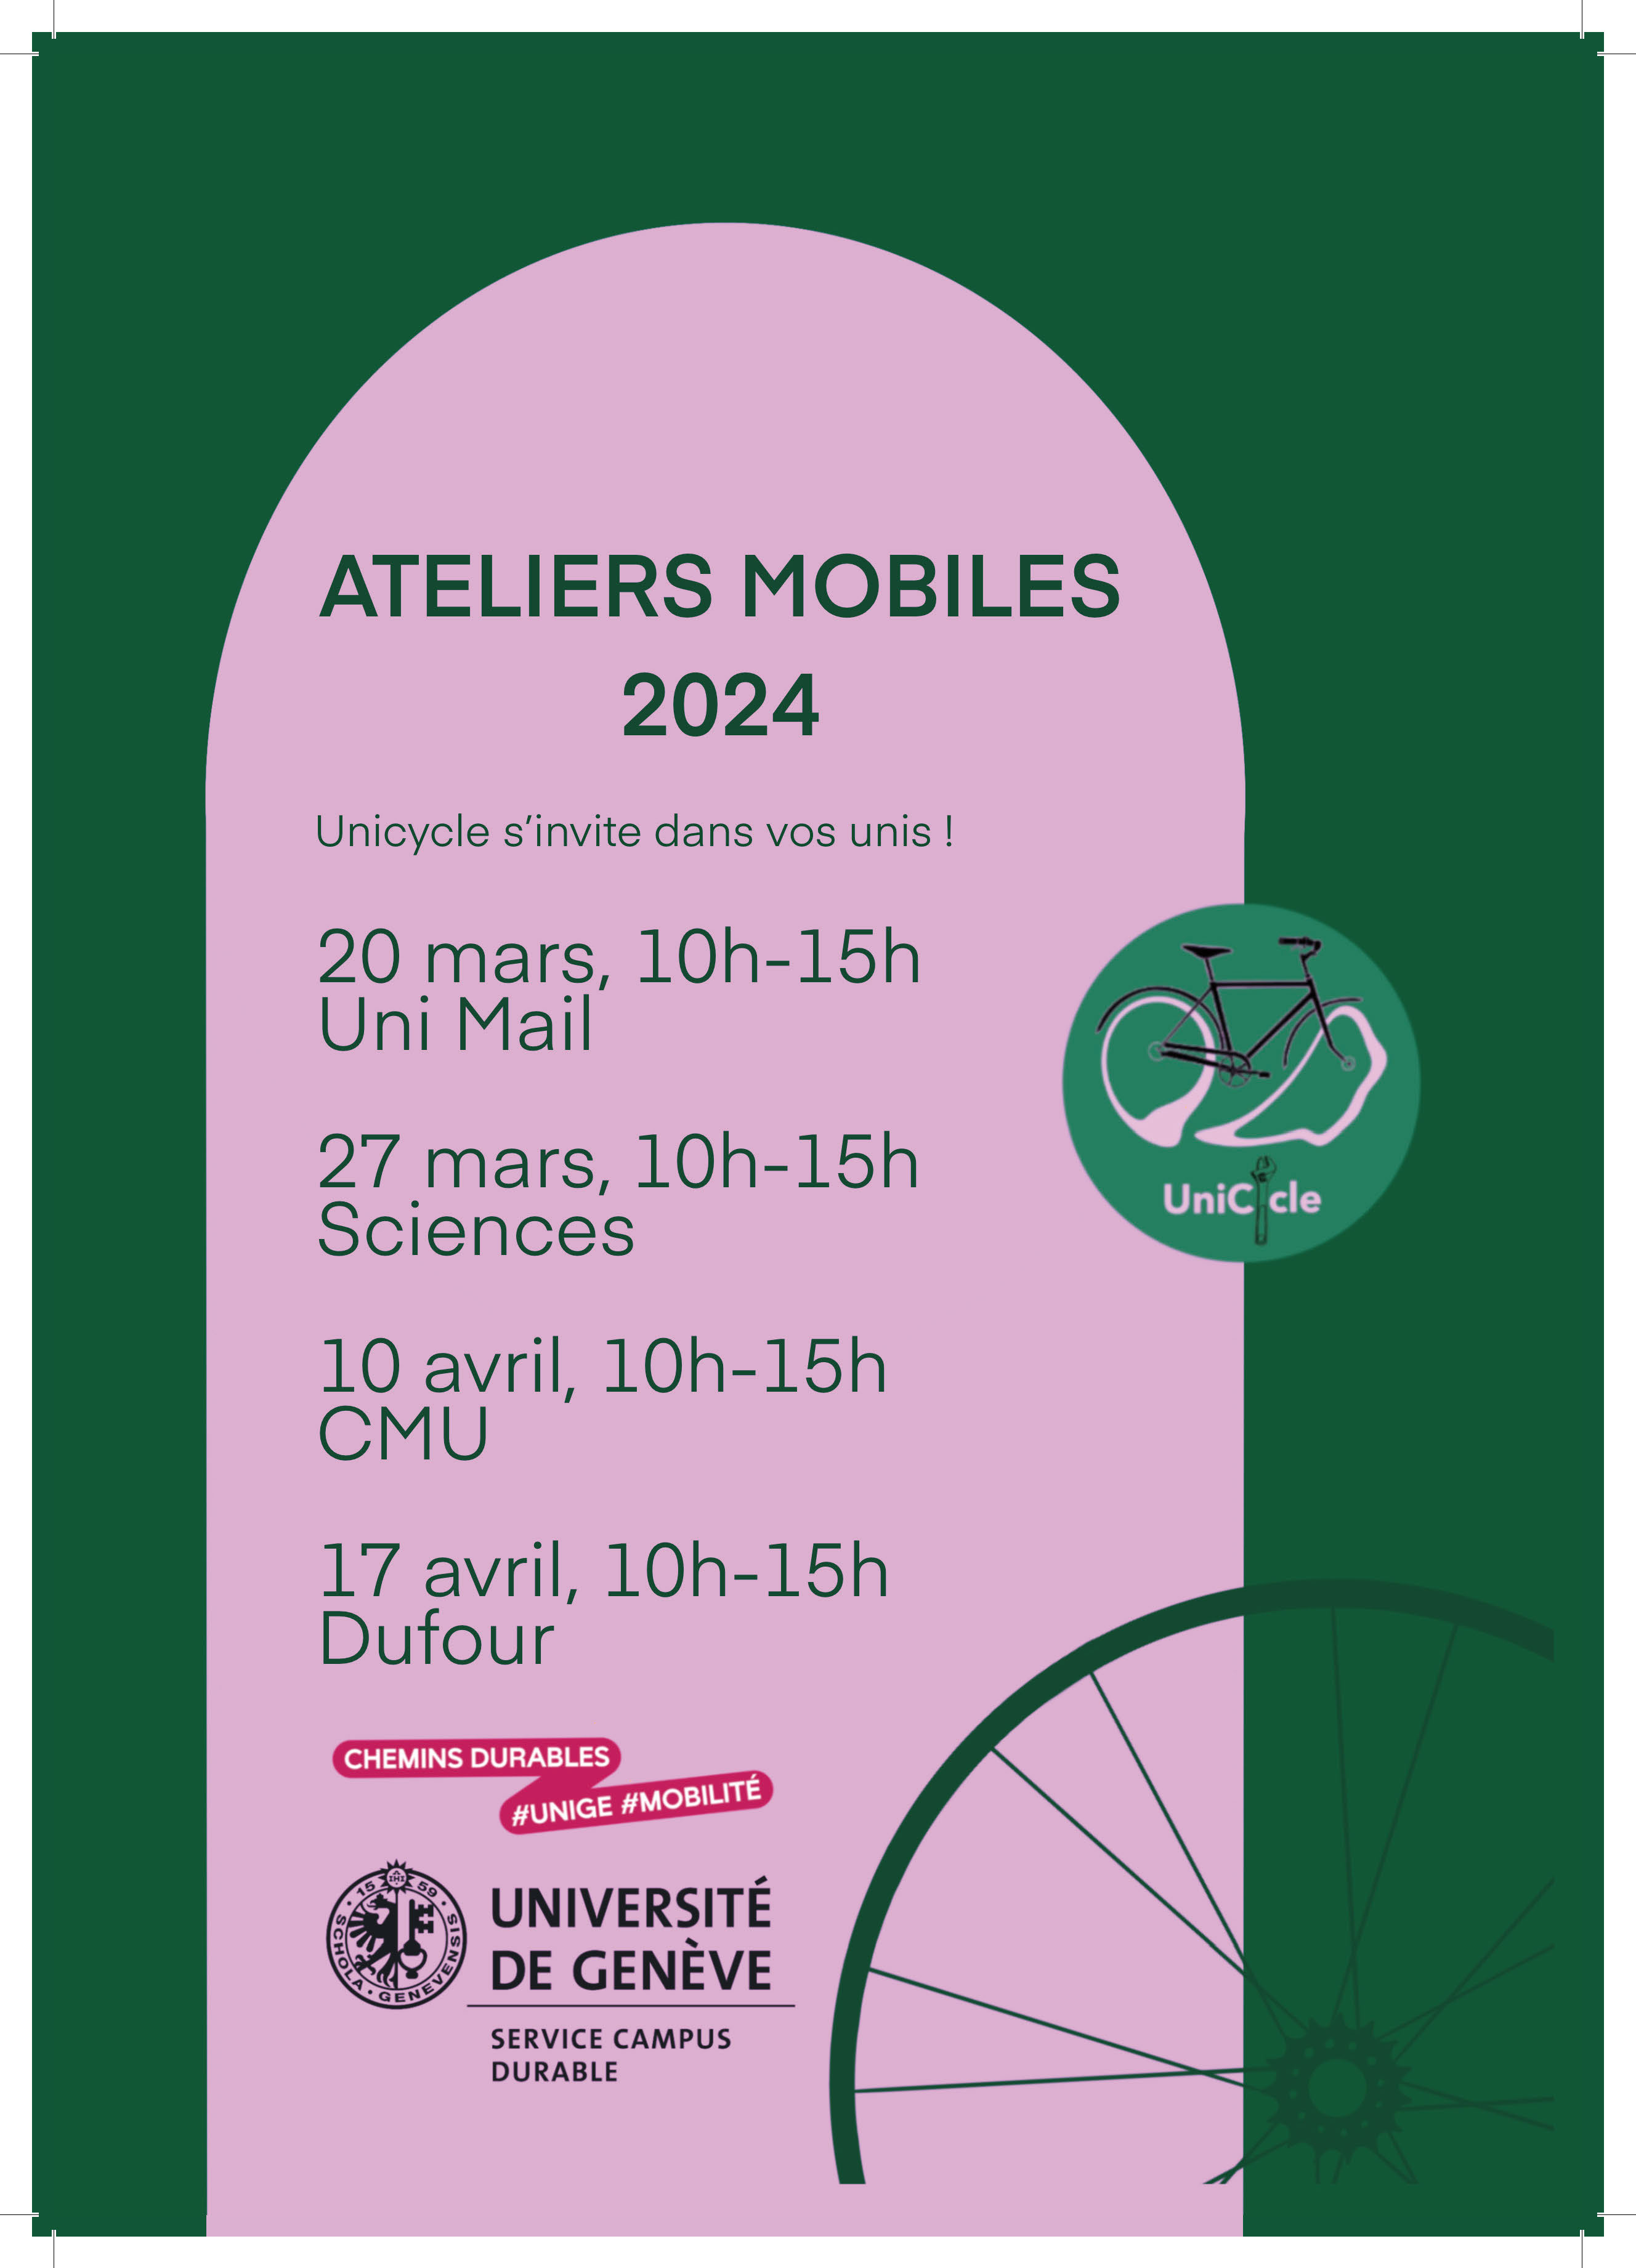 A4_UniCycle_Ateliers_2024.jpg